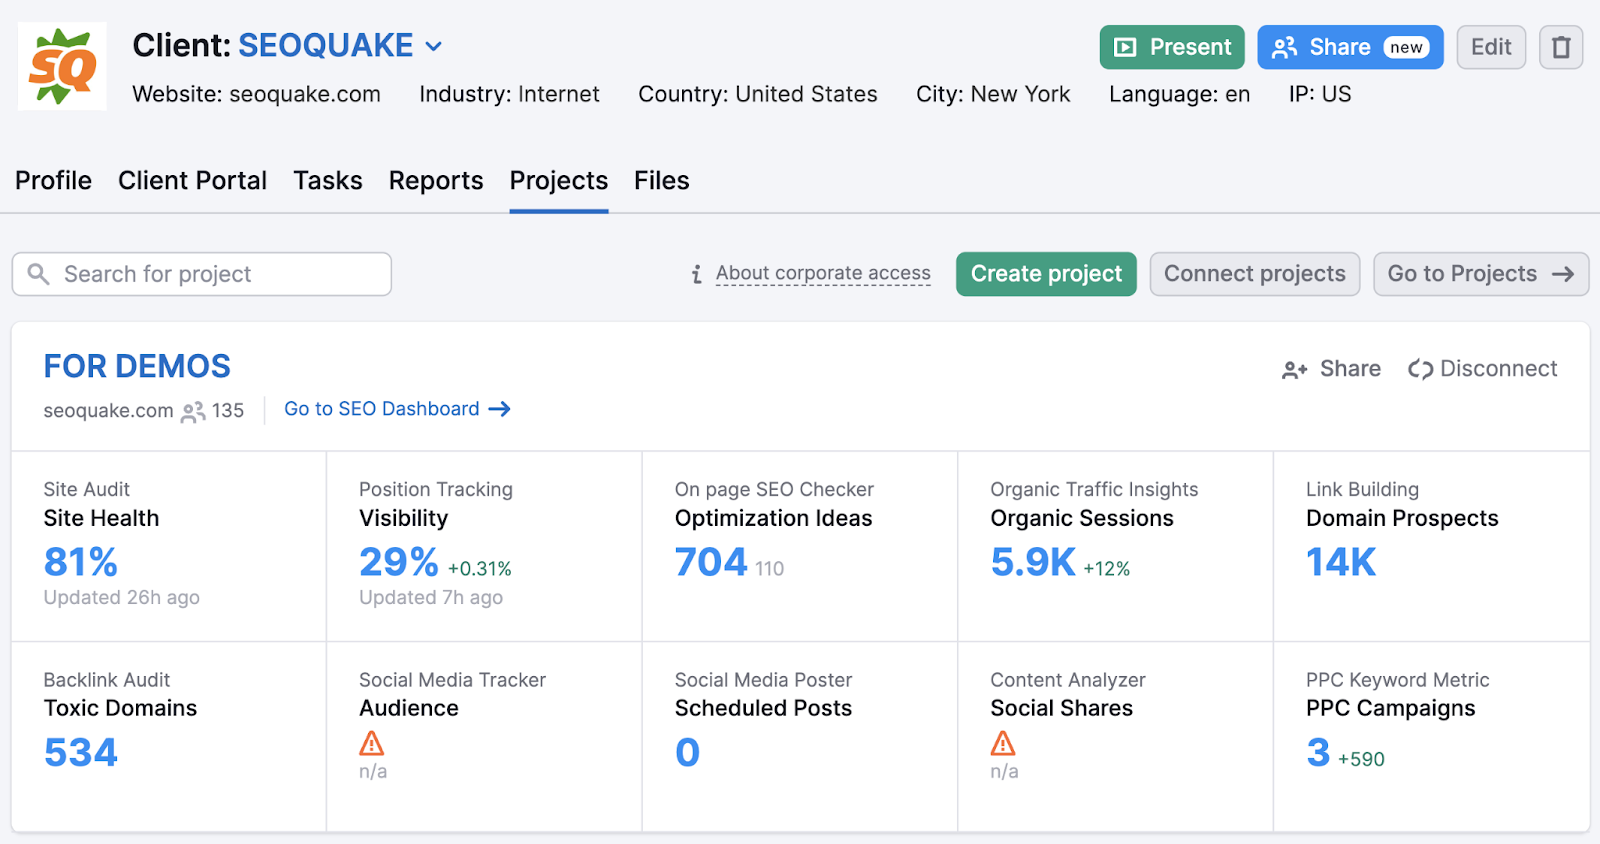 An overview with key metrics for "Client: SEOQUAKE" in CRM dashboard